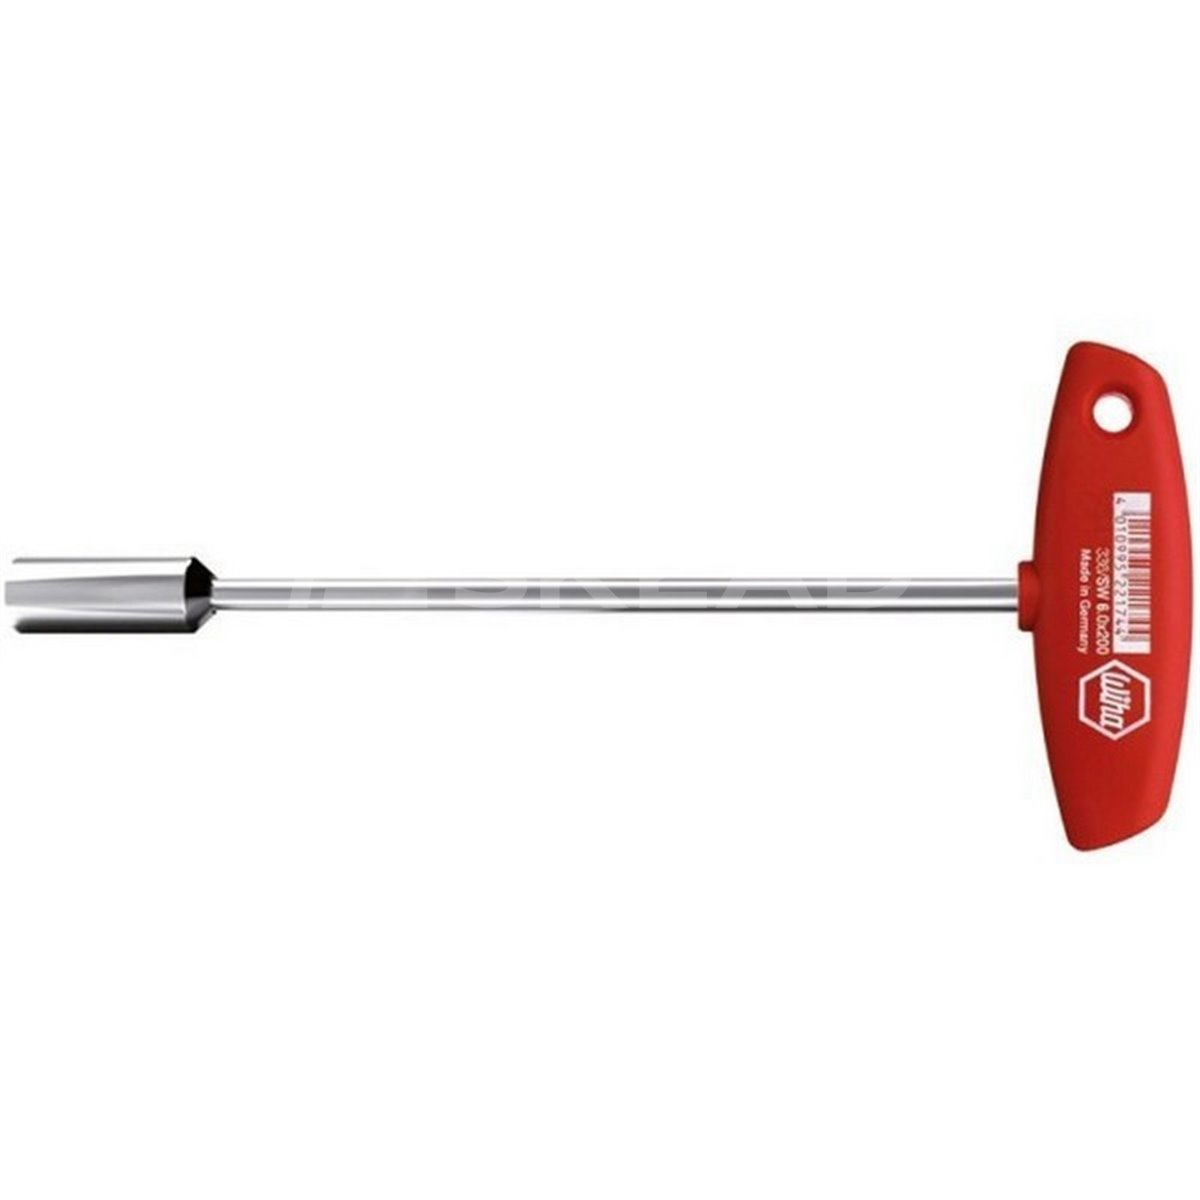 Socket wrench with T-handle. Classic 336 9 200mm Wiha 00975.